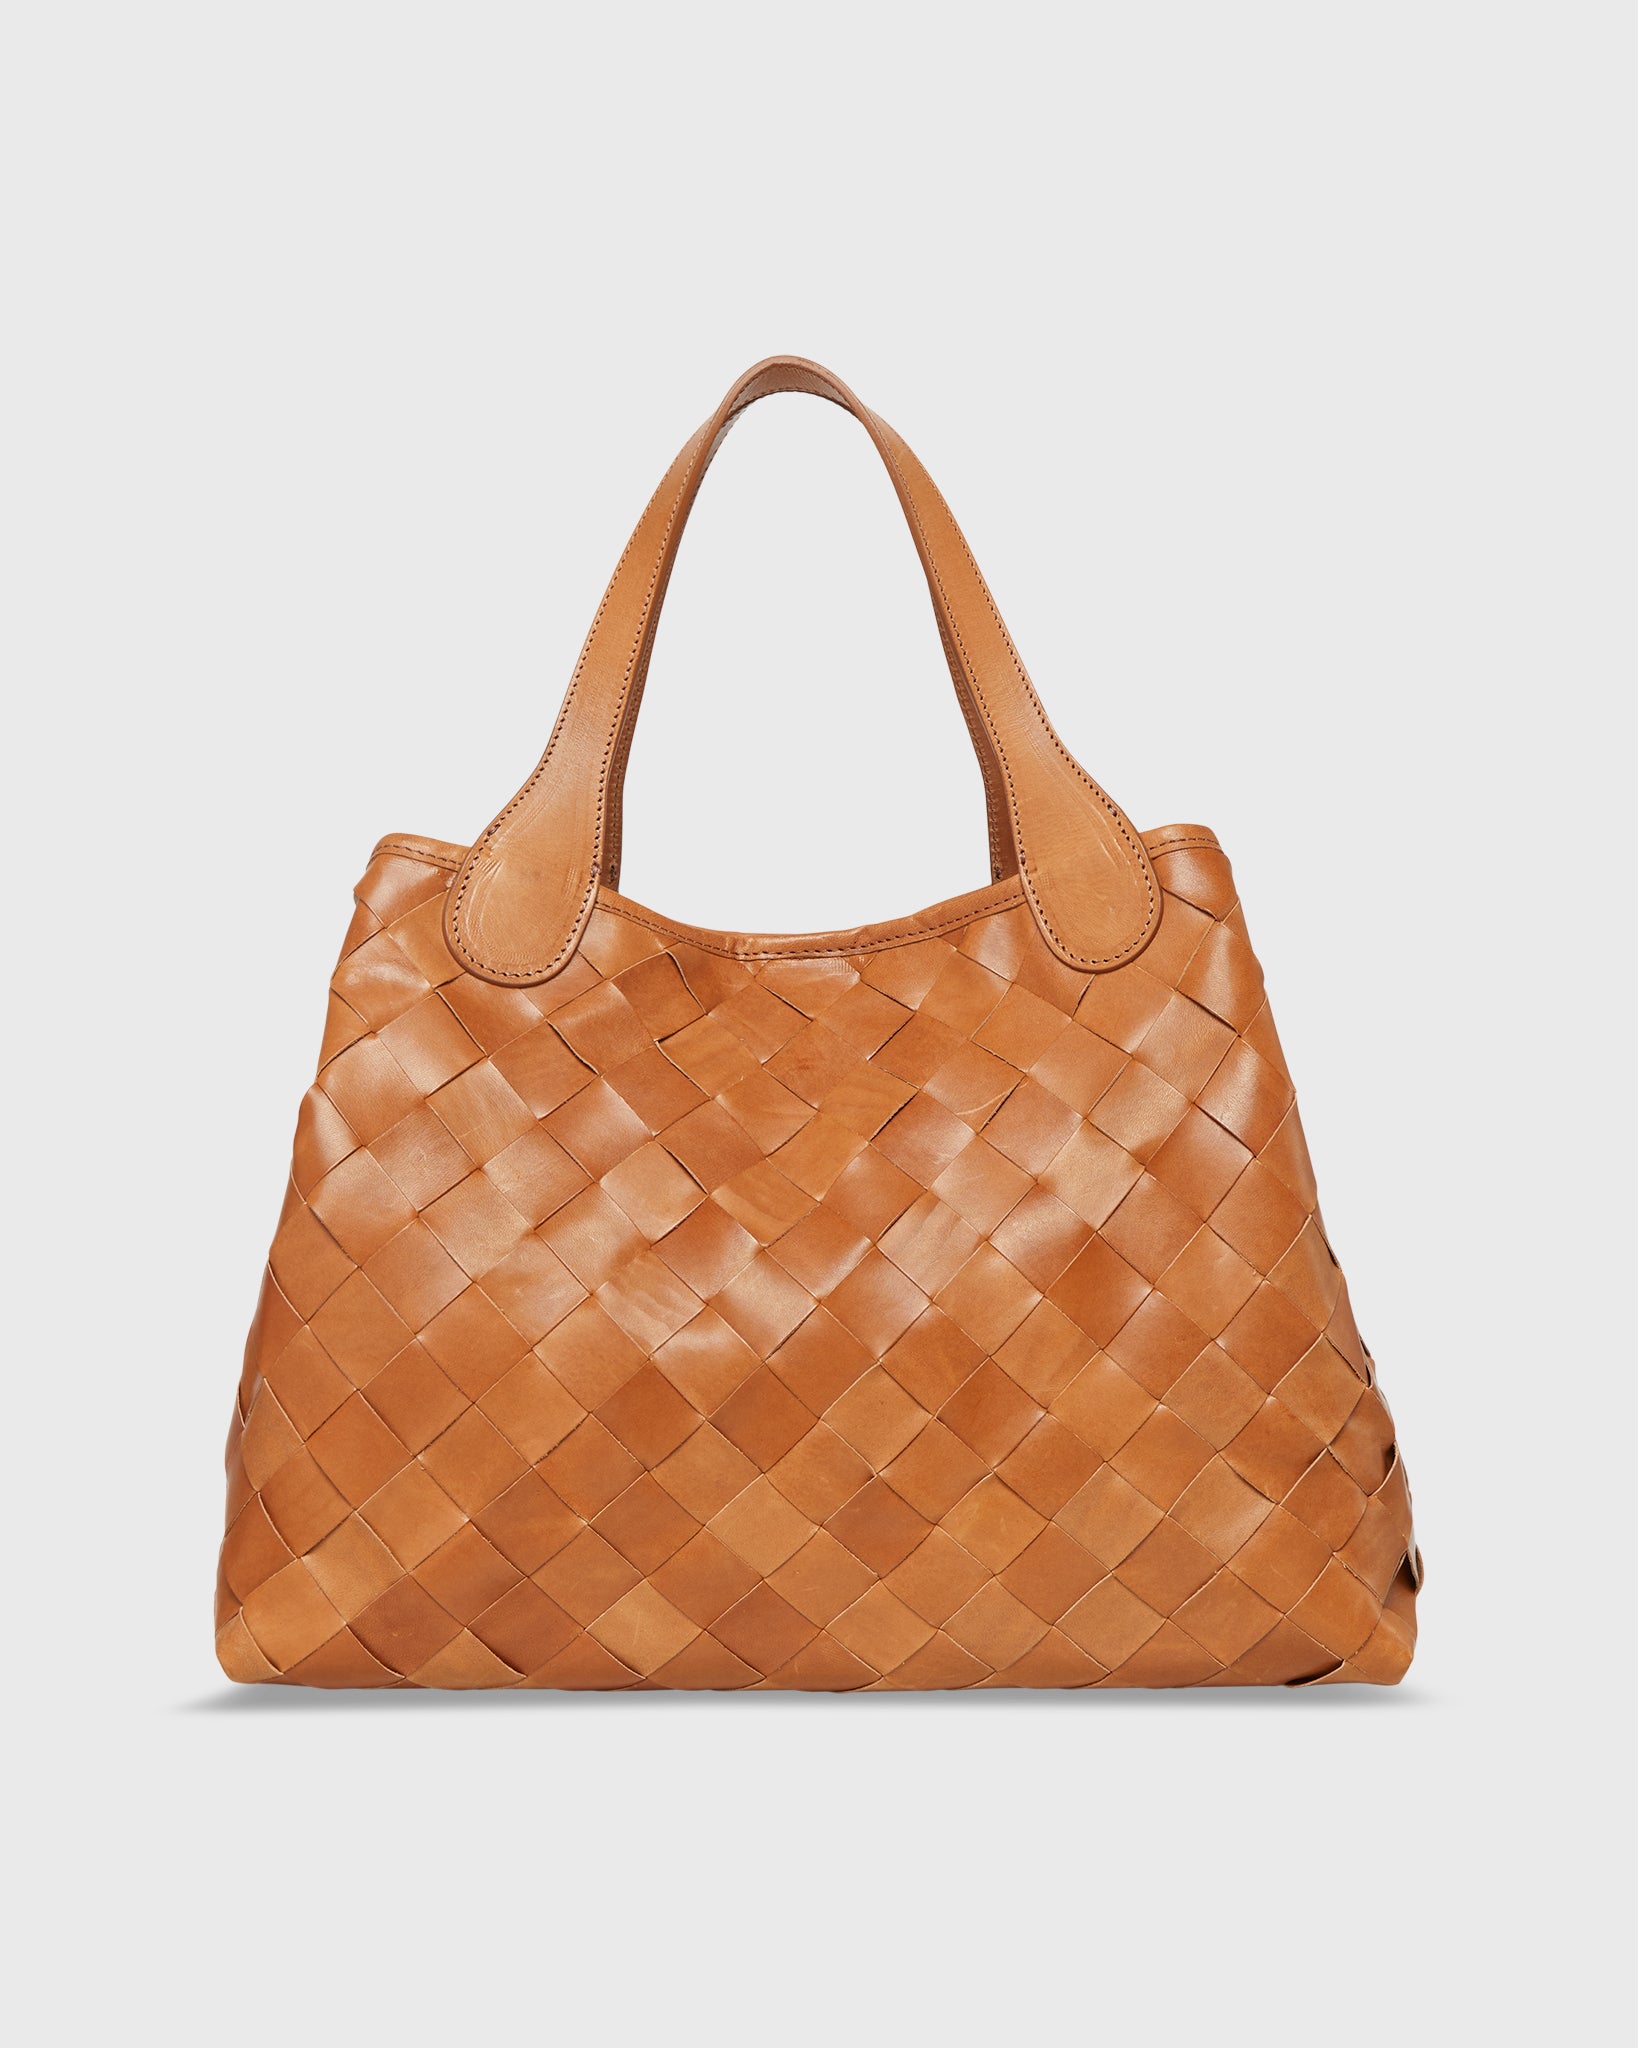 Veg-Tanned Handwoven Tote in Raw Tobacco Leather